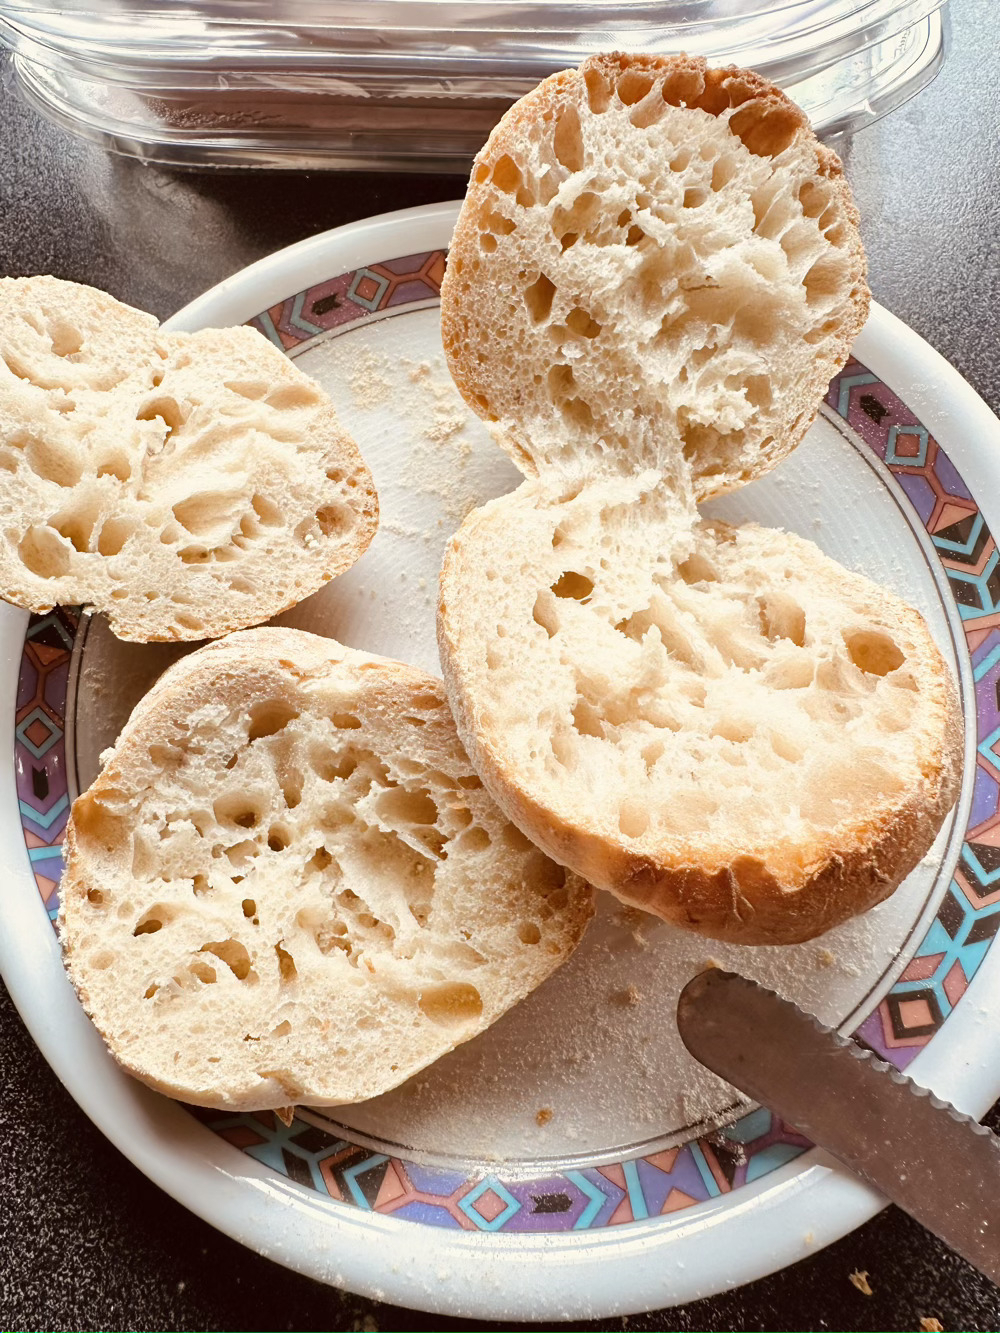 2 bread rolls, cut open, to reveal their holey crumb